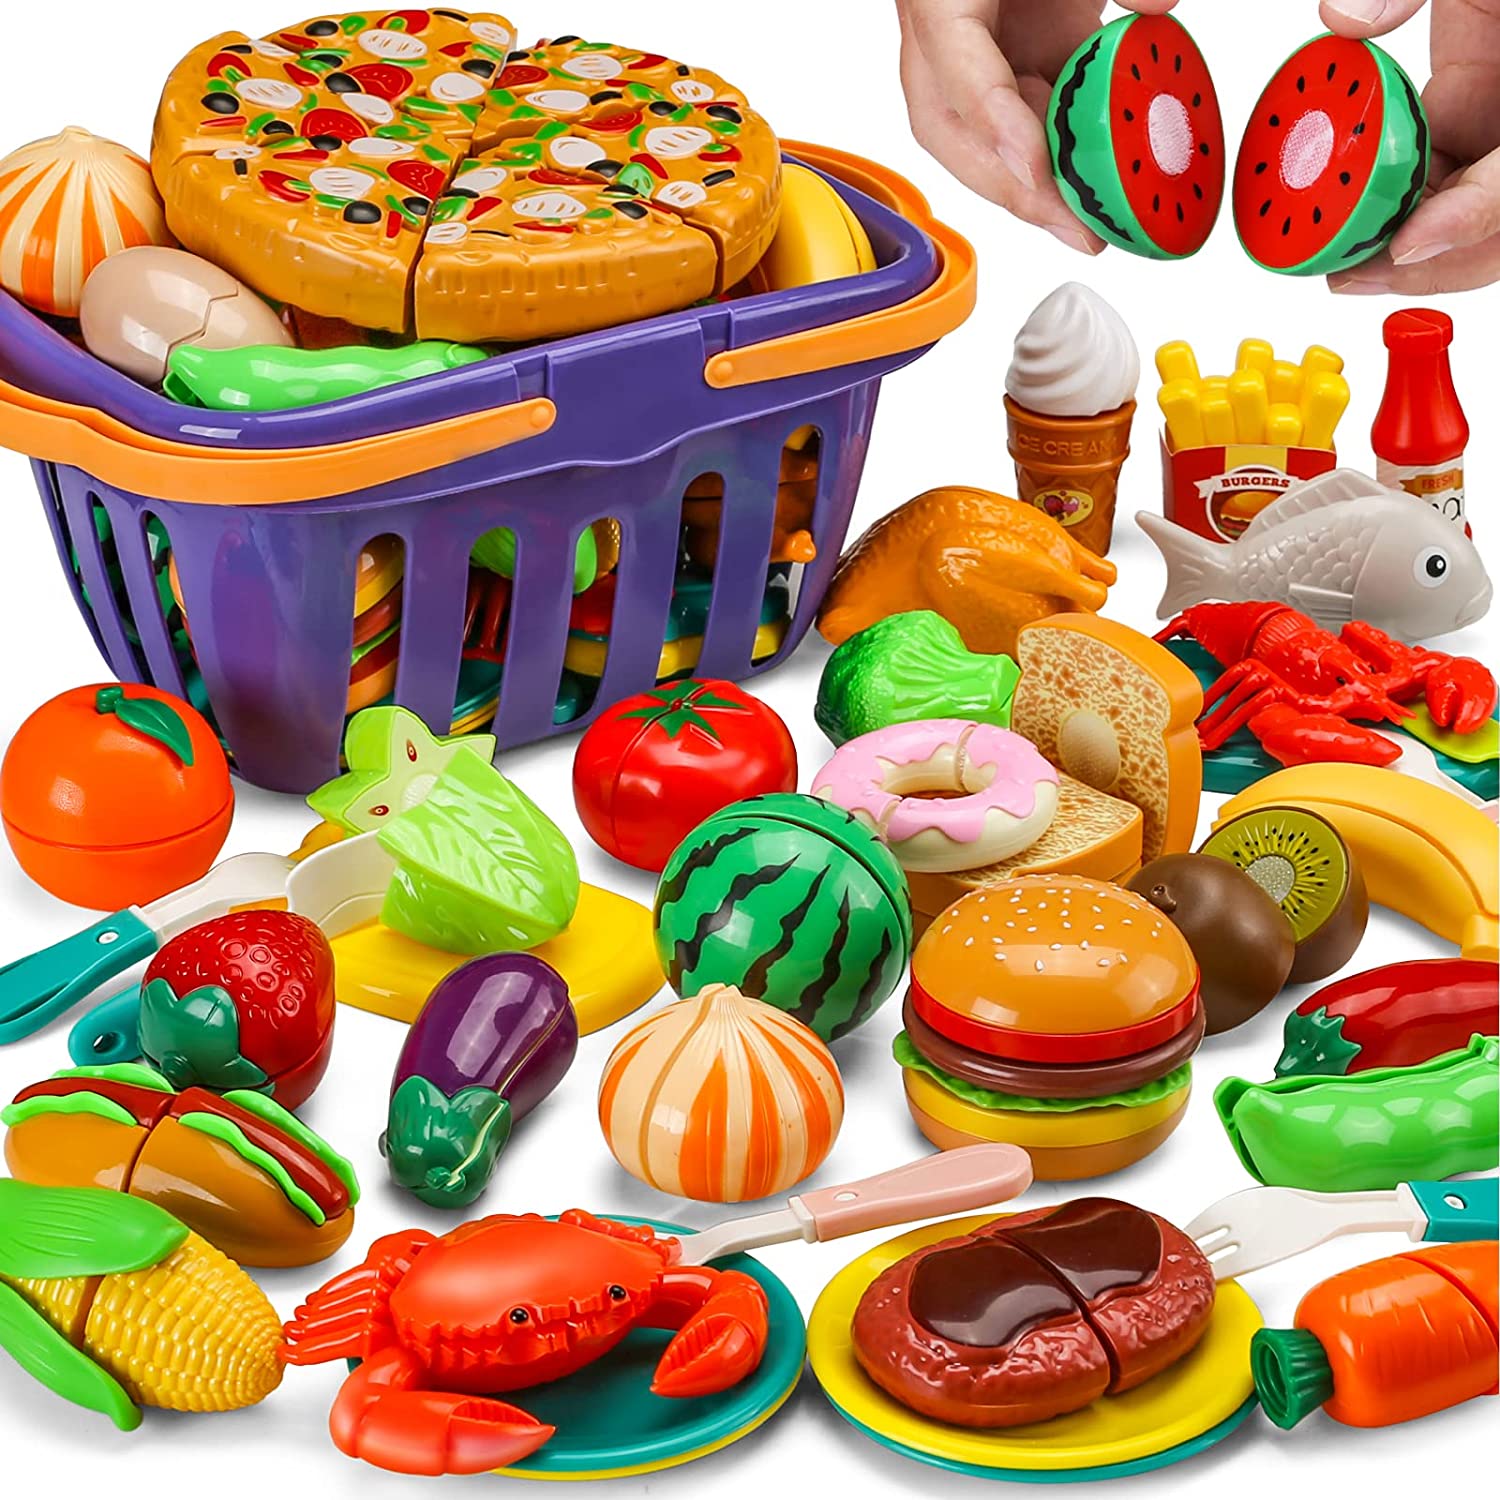 42 Items 87 Pcs Cutting Play Food Toy for Kids Kitchen [...]